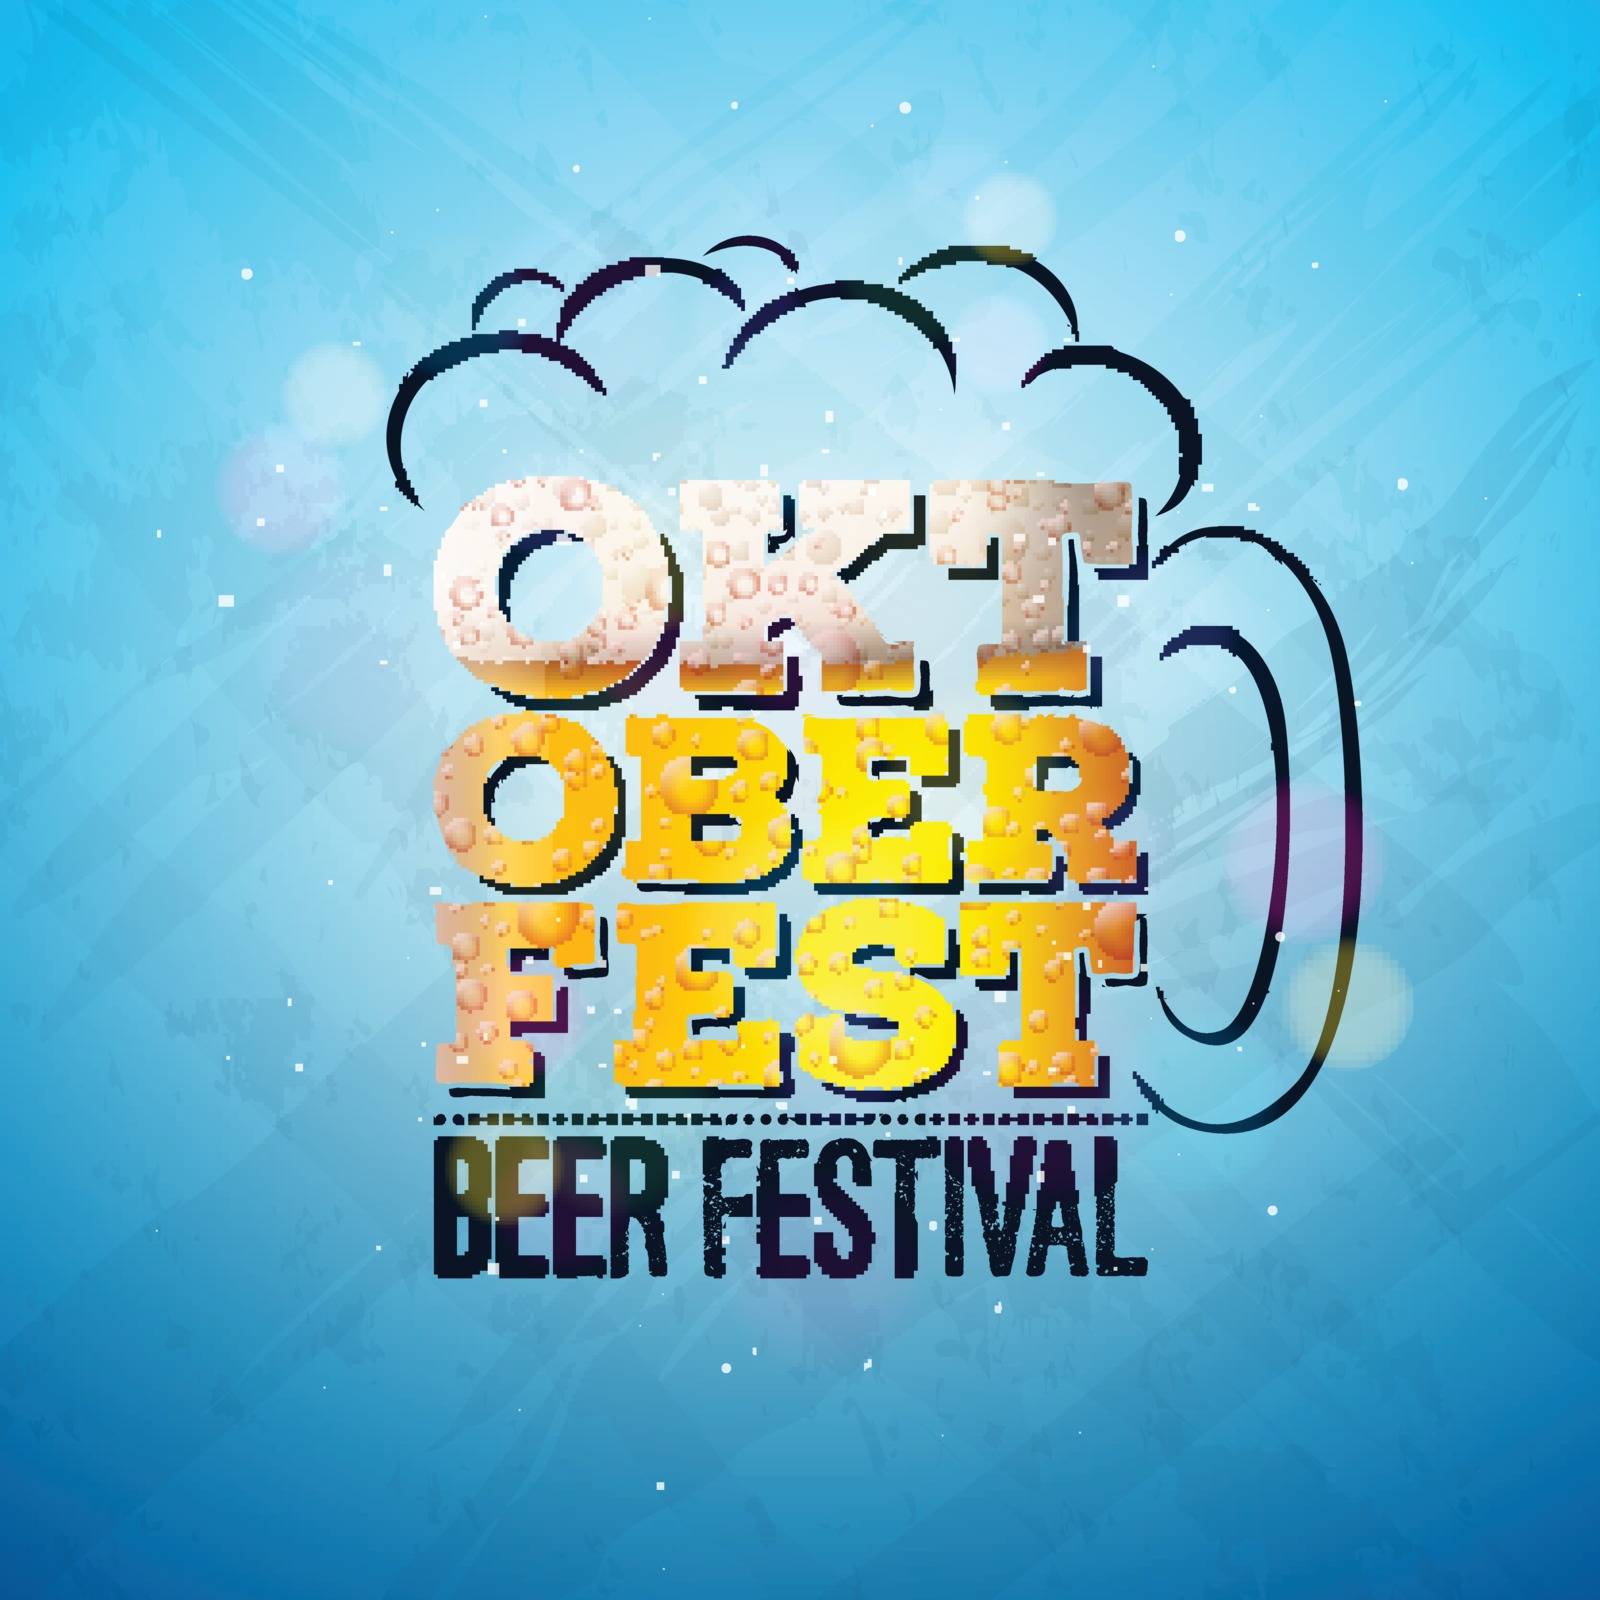 Oktoberfest Banner Illustration with Fresh Lager Beer in Typography Lettering on Shiny Blue Background. Vector Traditional German Beer Festival Design Template for Greeting Card, Celebration Flyer or Promotional Poster